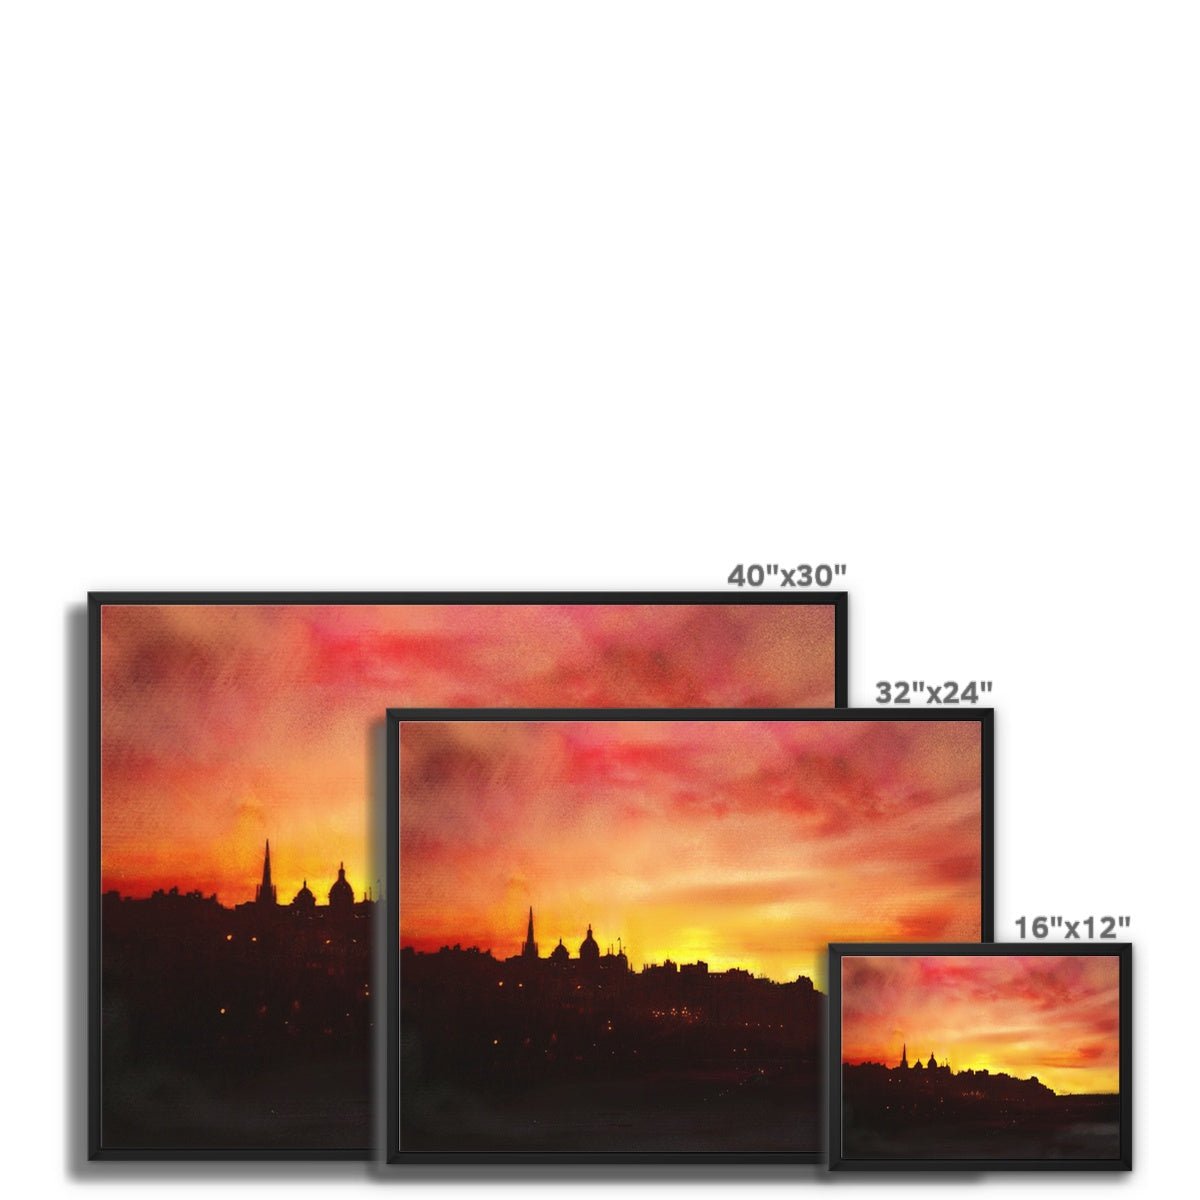 Edinburgh Sunset Painting | Framed Canvas From Scotland-Floating Framed Canvas Prints-Edinburgh & Glasgow Art Gallery-Paintings, Prints, Homeware, Art Gifts From Scotland By Scottish Artist Kevin Hunter